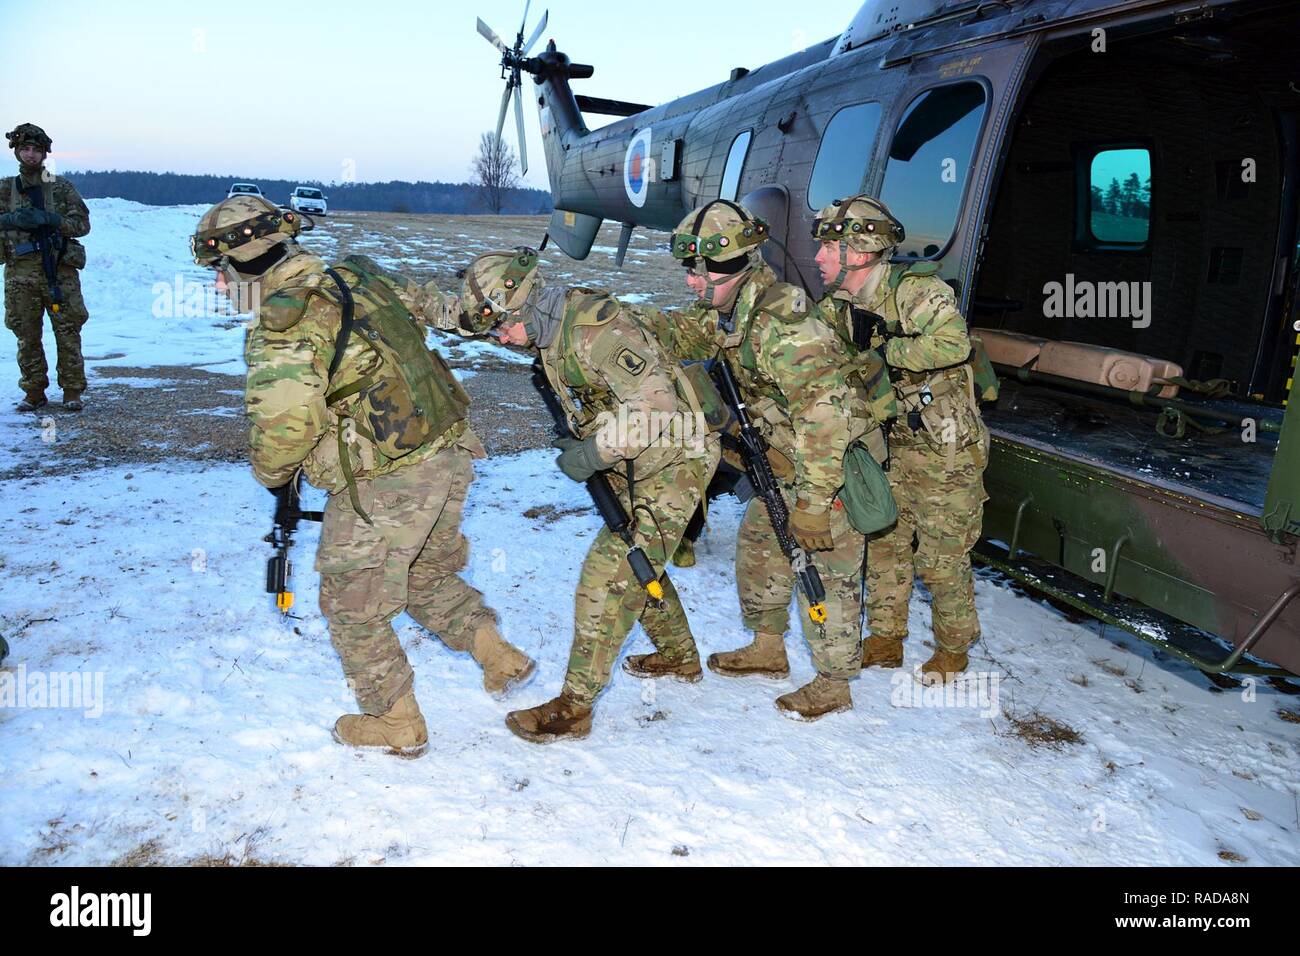 U.S. Army paratroopers from the 173rd Brigade Support Battalion, 173rd Airborne Brigade, return  following a simulated casualty carry aboard a Slovenian Air Force Eurocopter H3-72, during a casualty evacuation training during exercise Lipizzaner III in Pocek, Slovenia, Jan. 28, 2017. Lipizzaner is a combined squad-level training exercise in preparation for platoon evaluation, and to validate battalion-level deployment procedures. Stock Photo